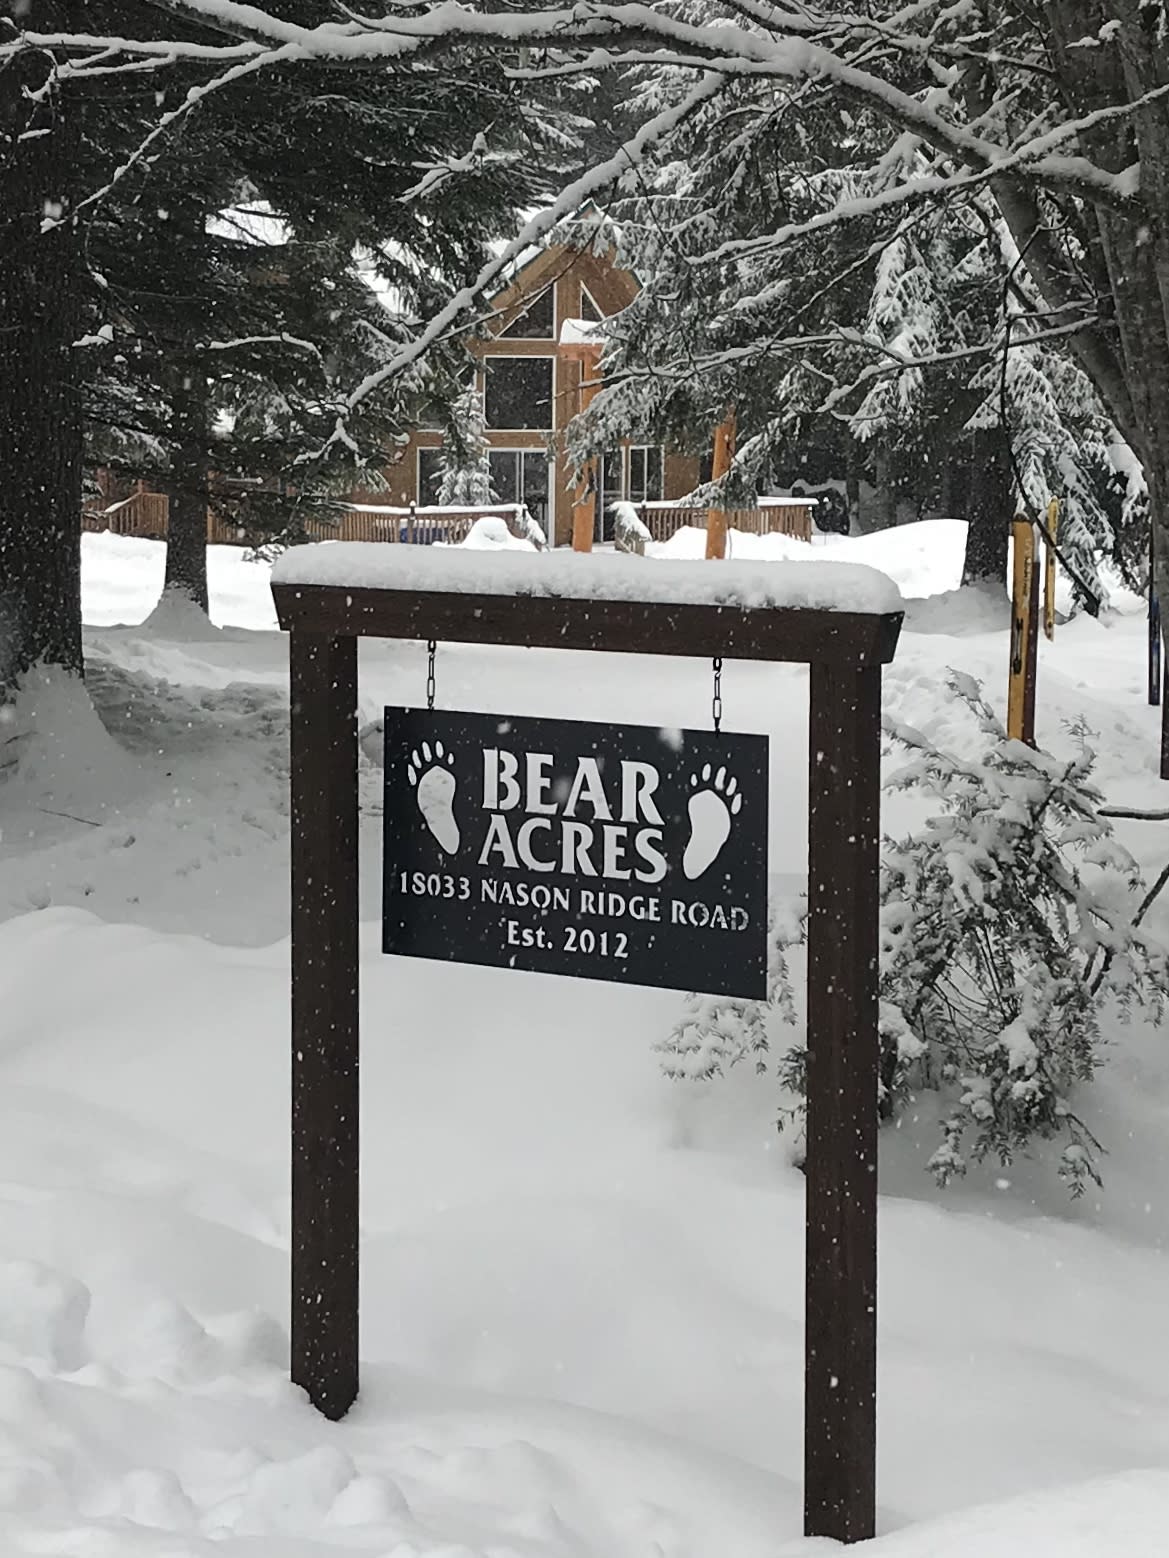 Welcomed to Bear Acres